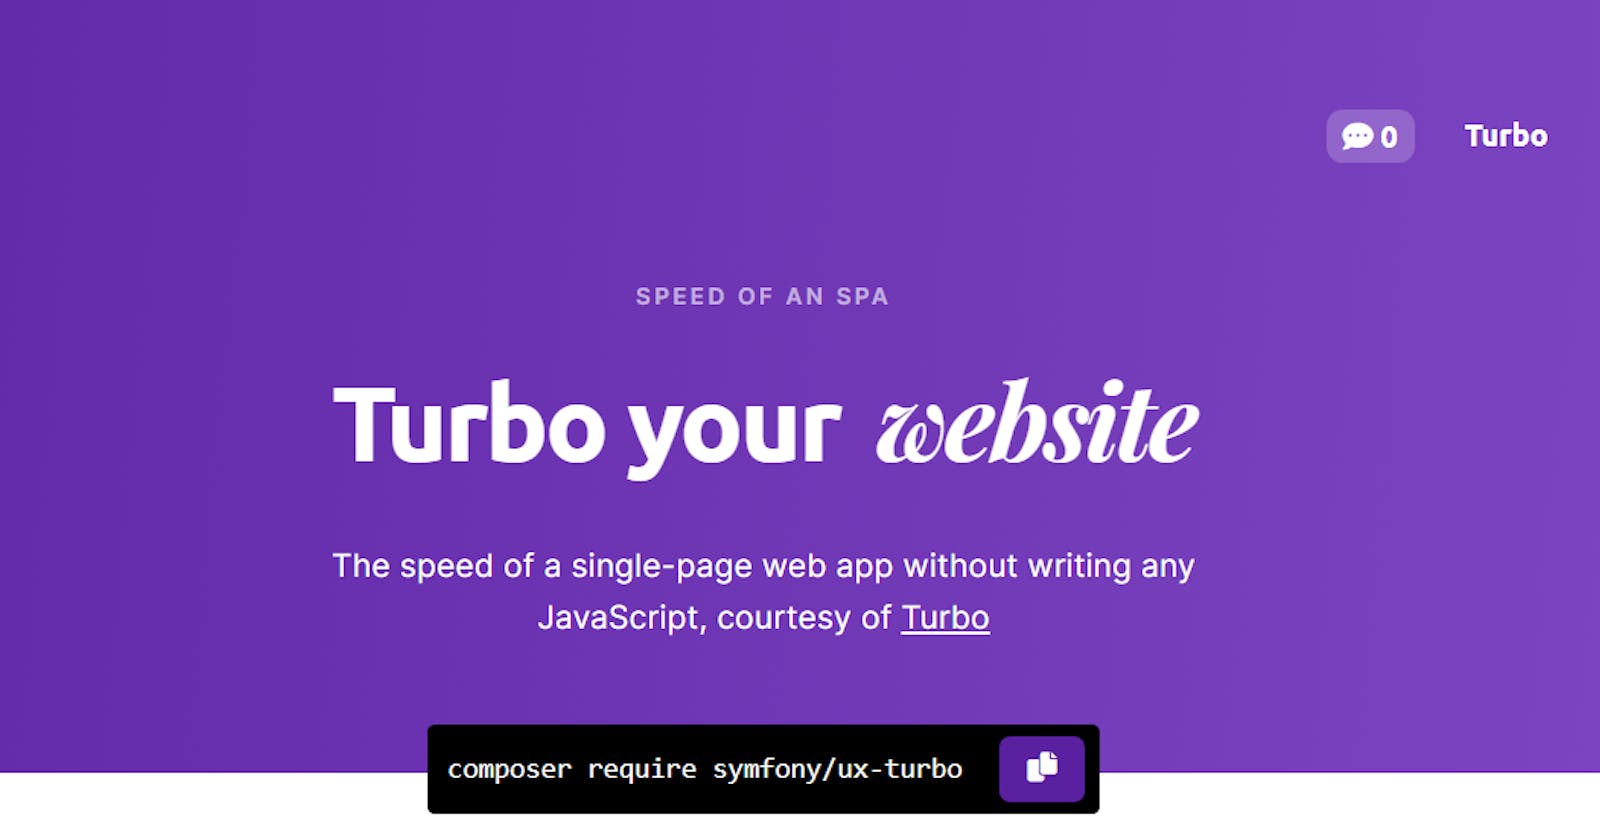 Discover Symfony UX. Turbo lets you put SPAs in the Rearview Mirror.